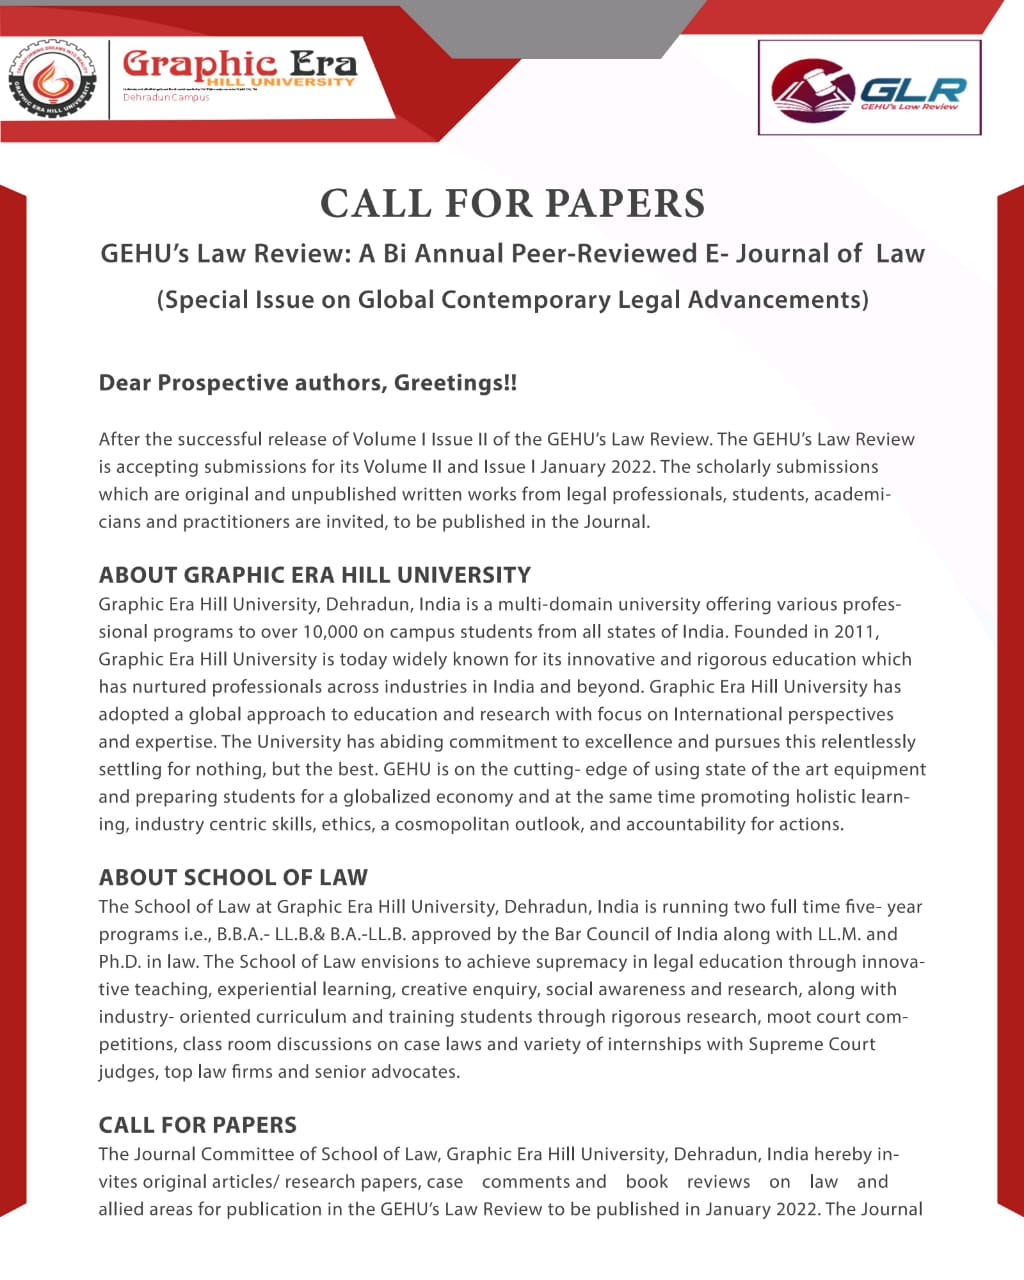 (CALL FOR PAPERS) GEHU’s Law Review: A Bi-Annual Peer-Reviewed E-Journal of Law (Special Issue on Global Contemporary Legal Advancements)